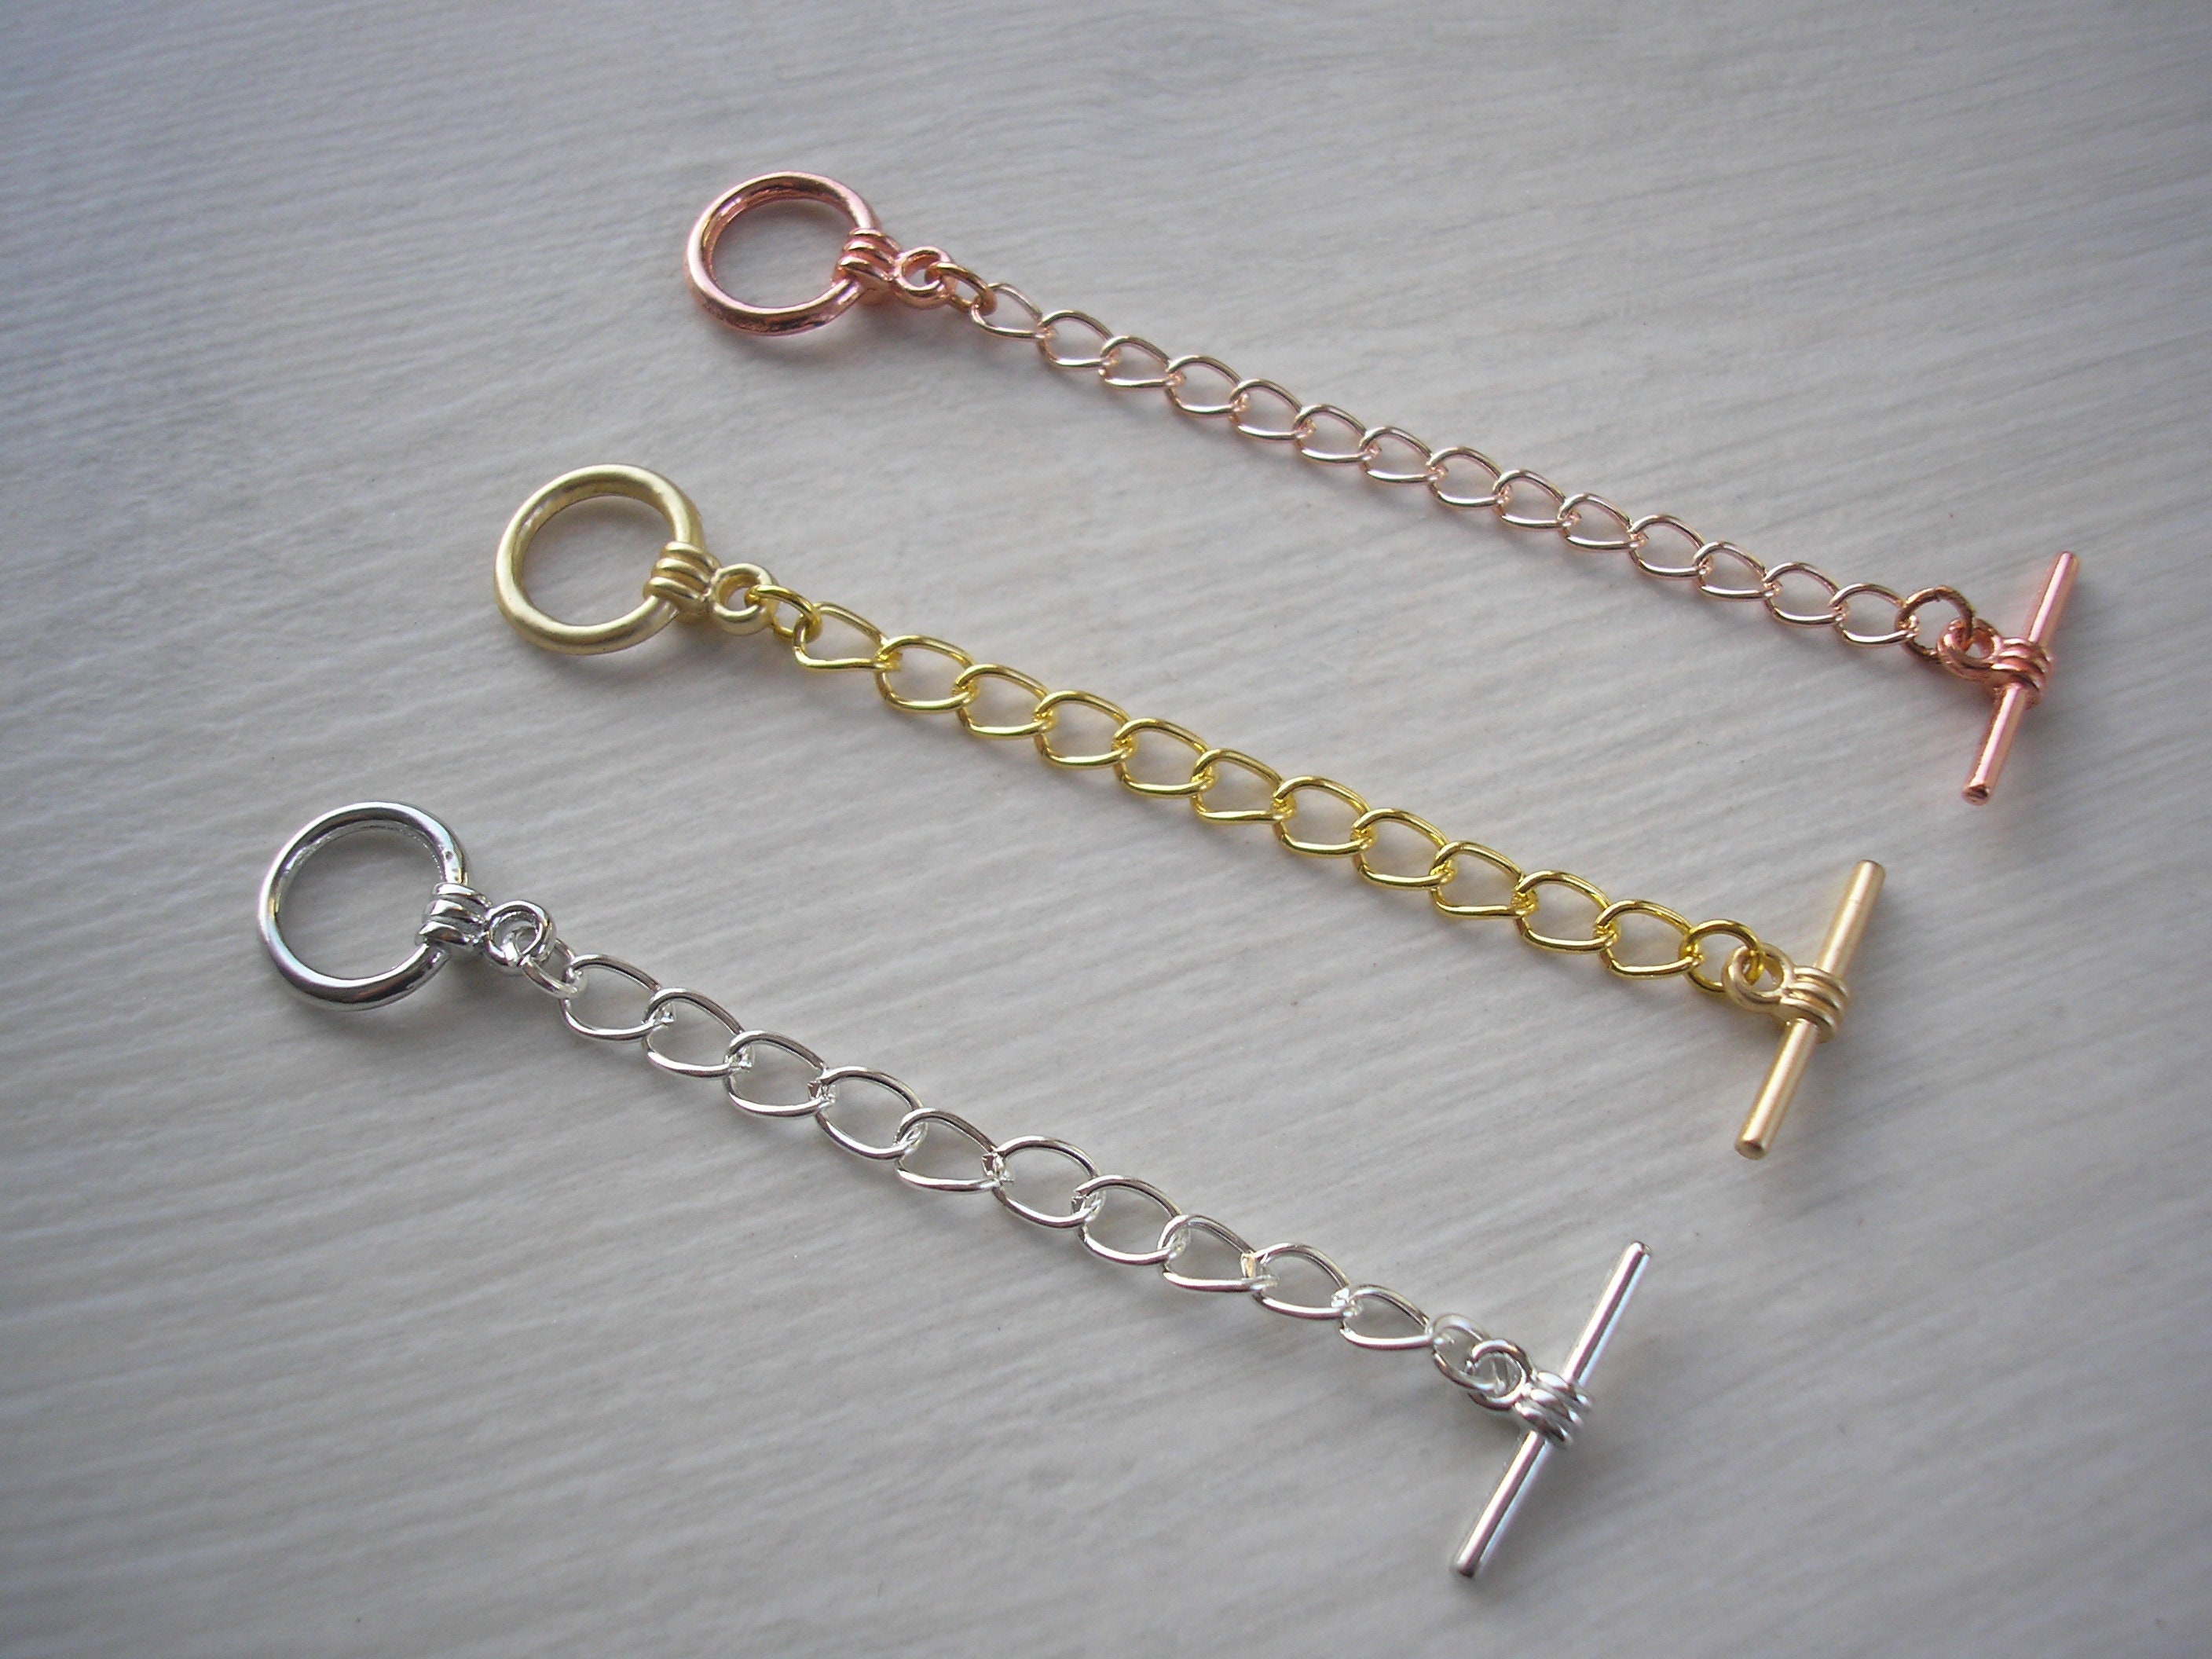 Necklace Chain Extender, 5mm Curb Links with Drop 2 Inches, Antiqued Brass  (5 Pieces) 